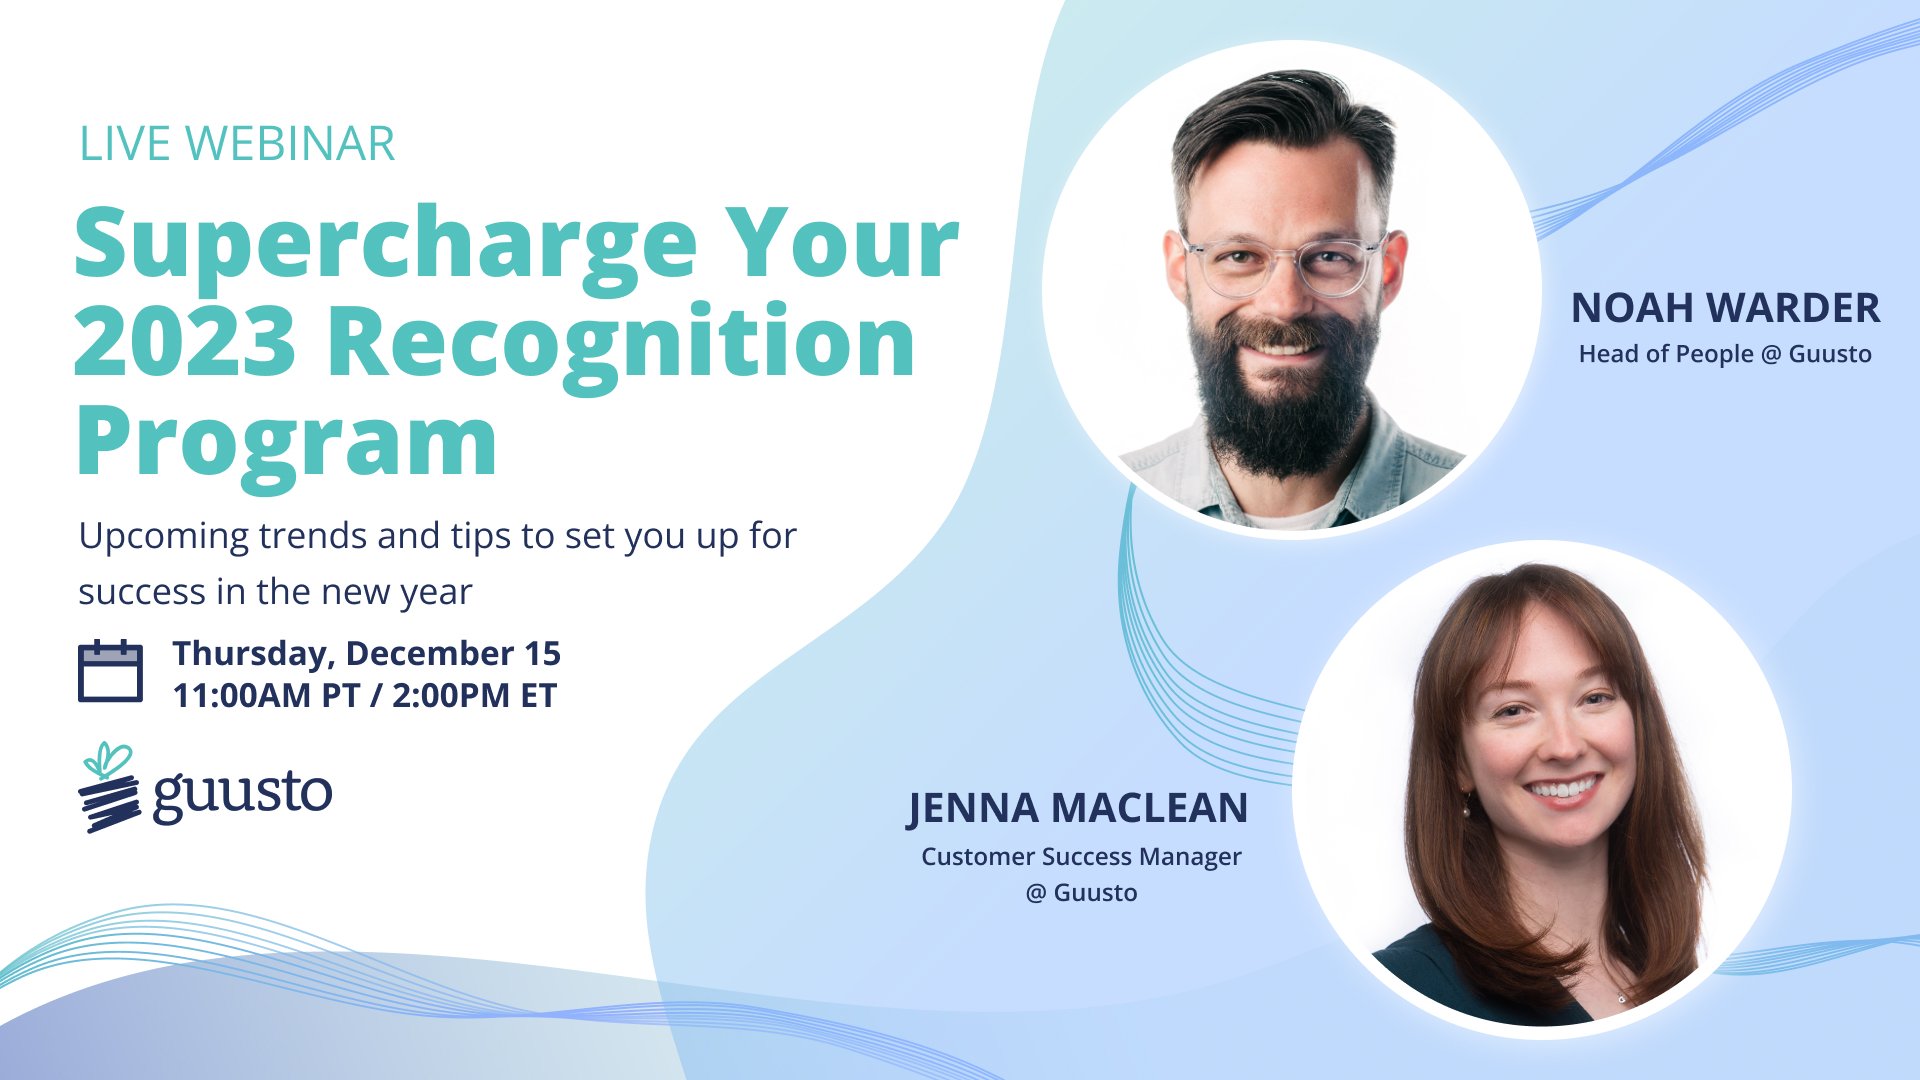 Supercharge Your 2023 Recognition Program